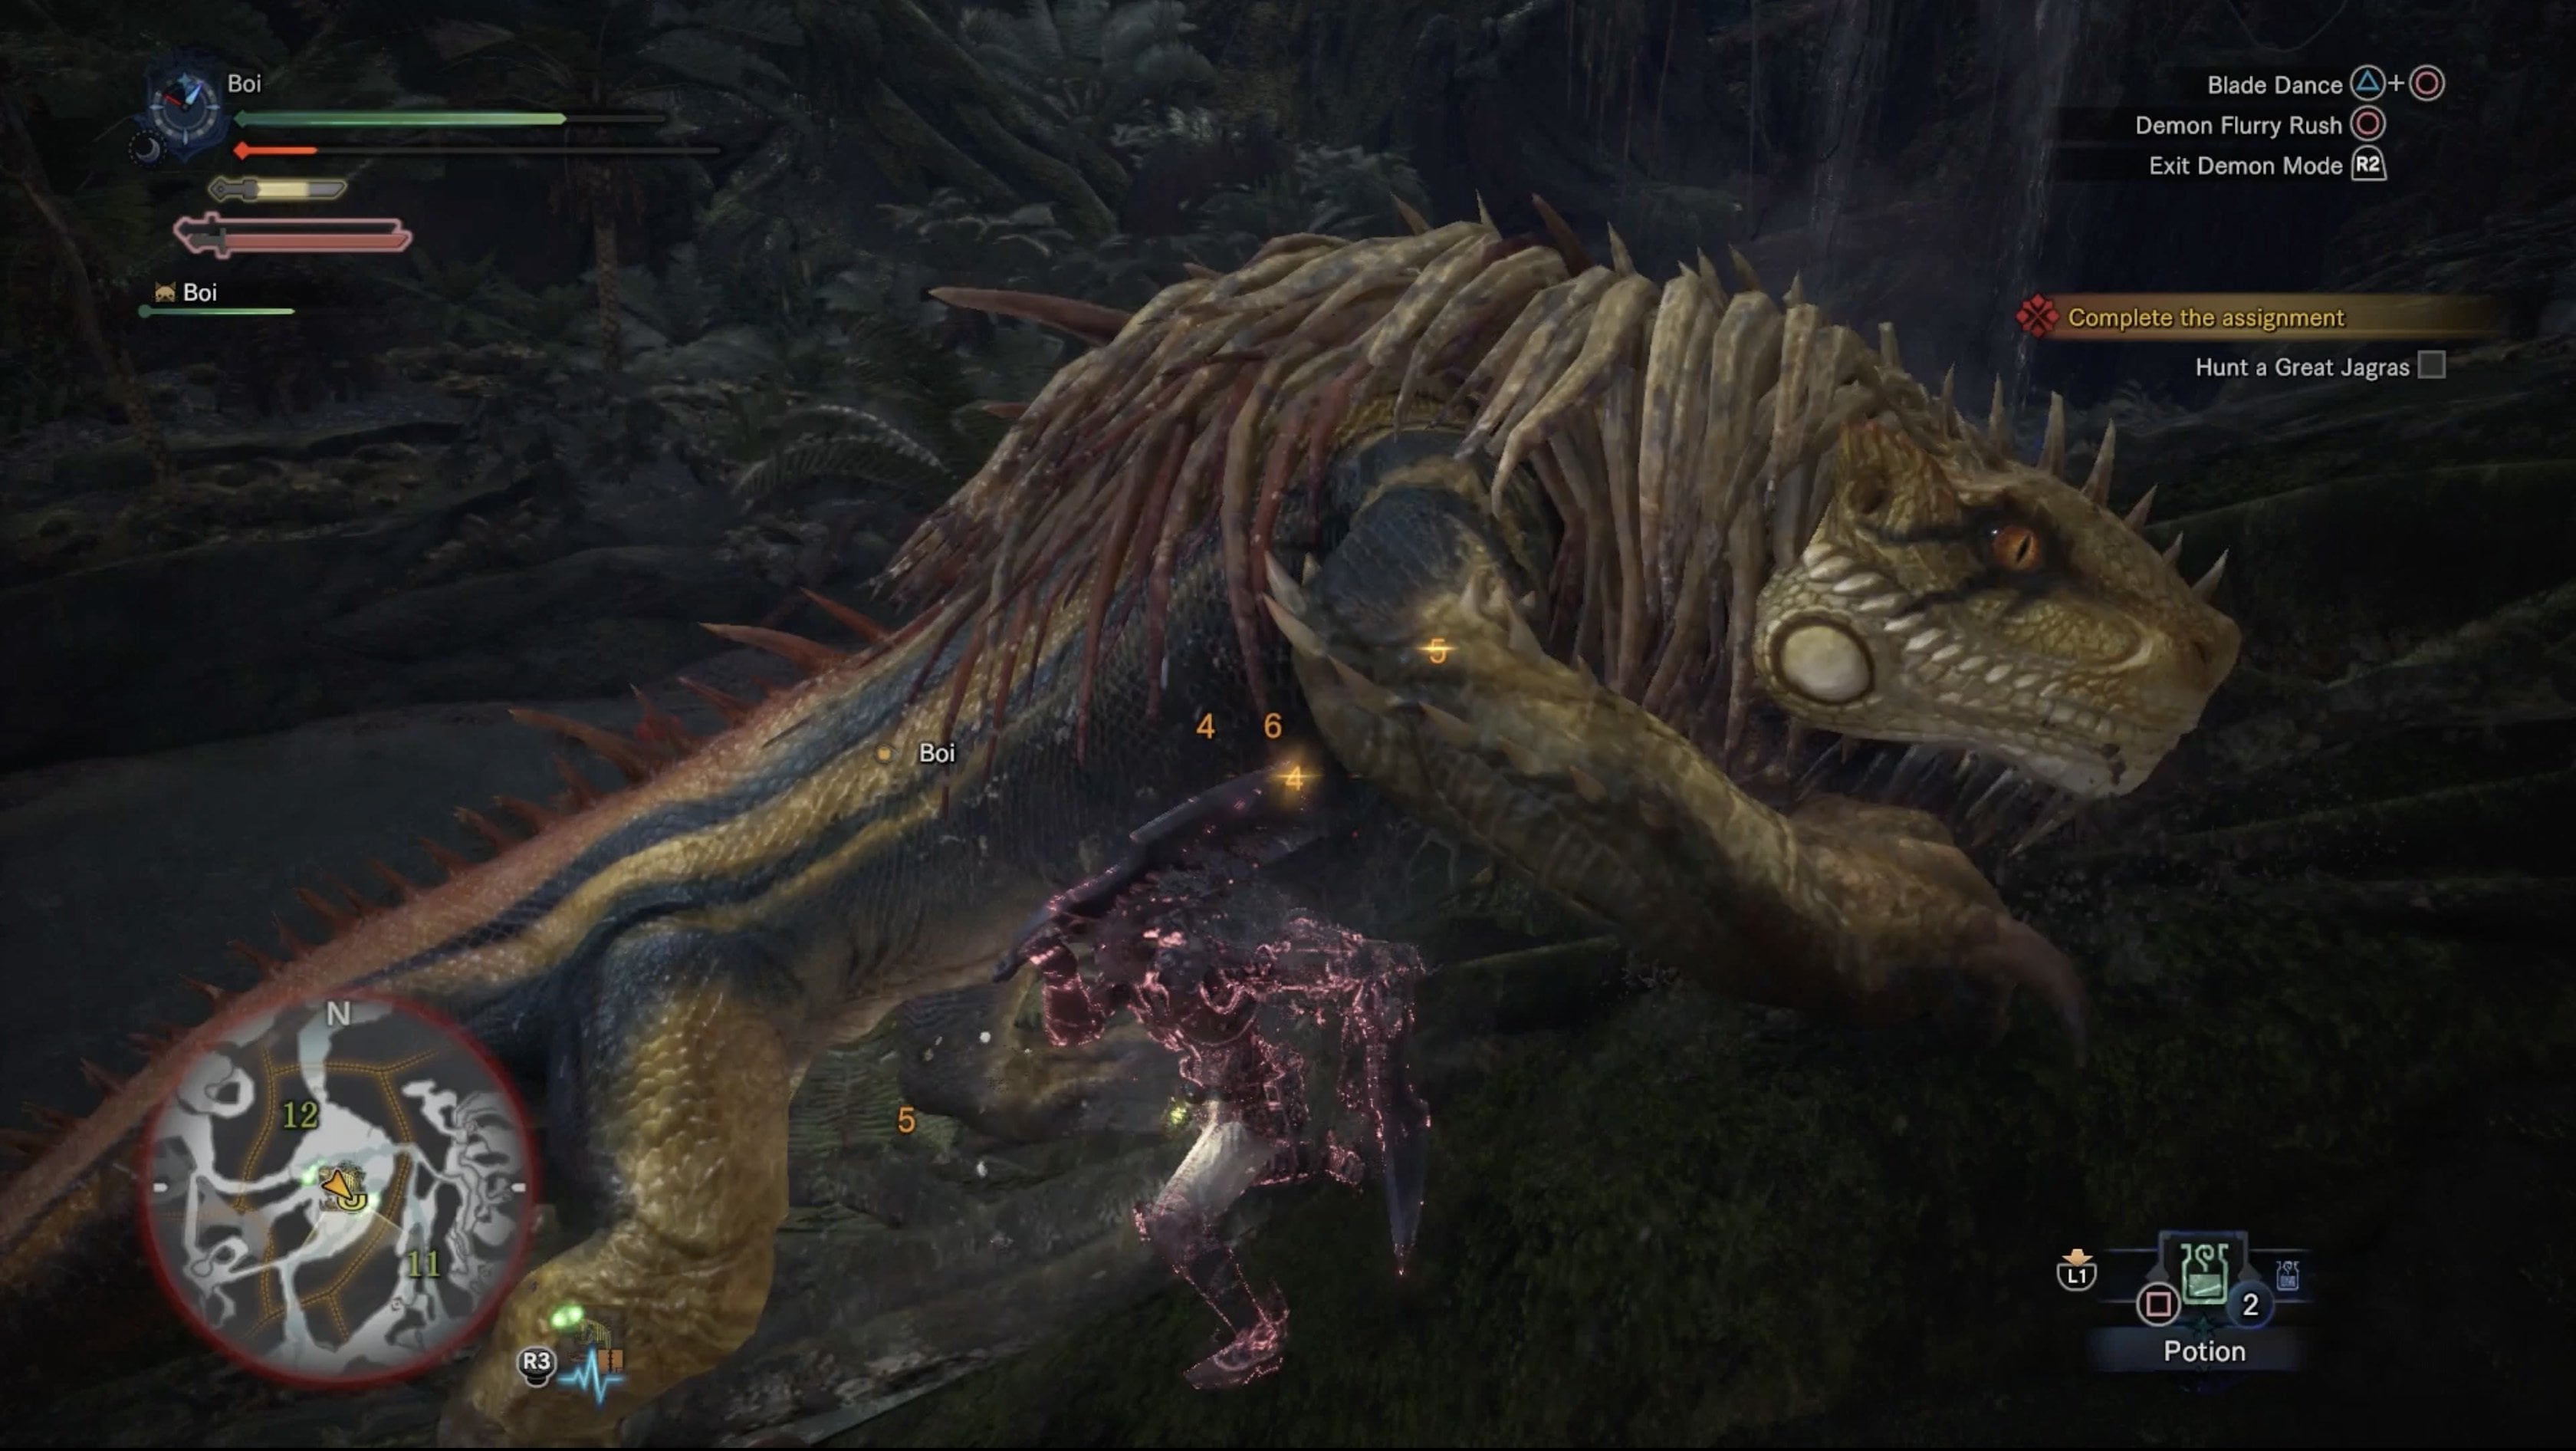 The Great Jagras Hunt.